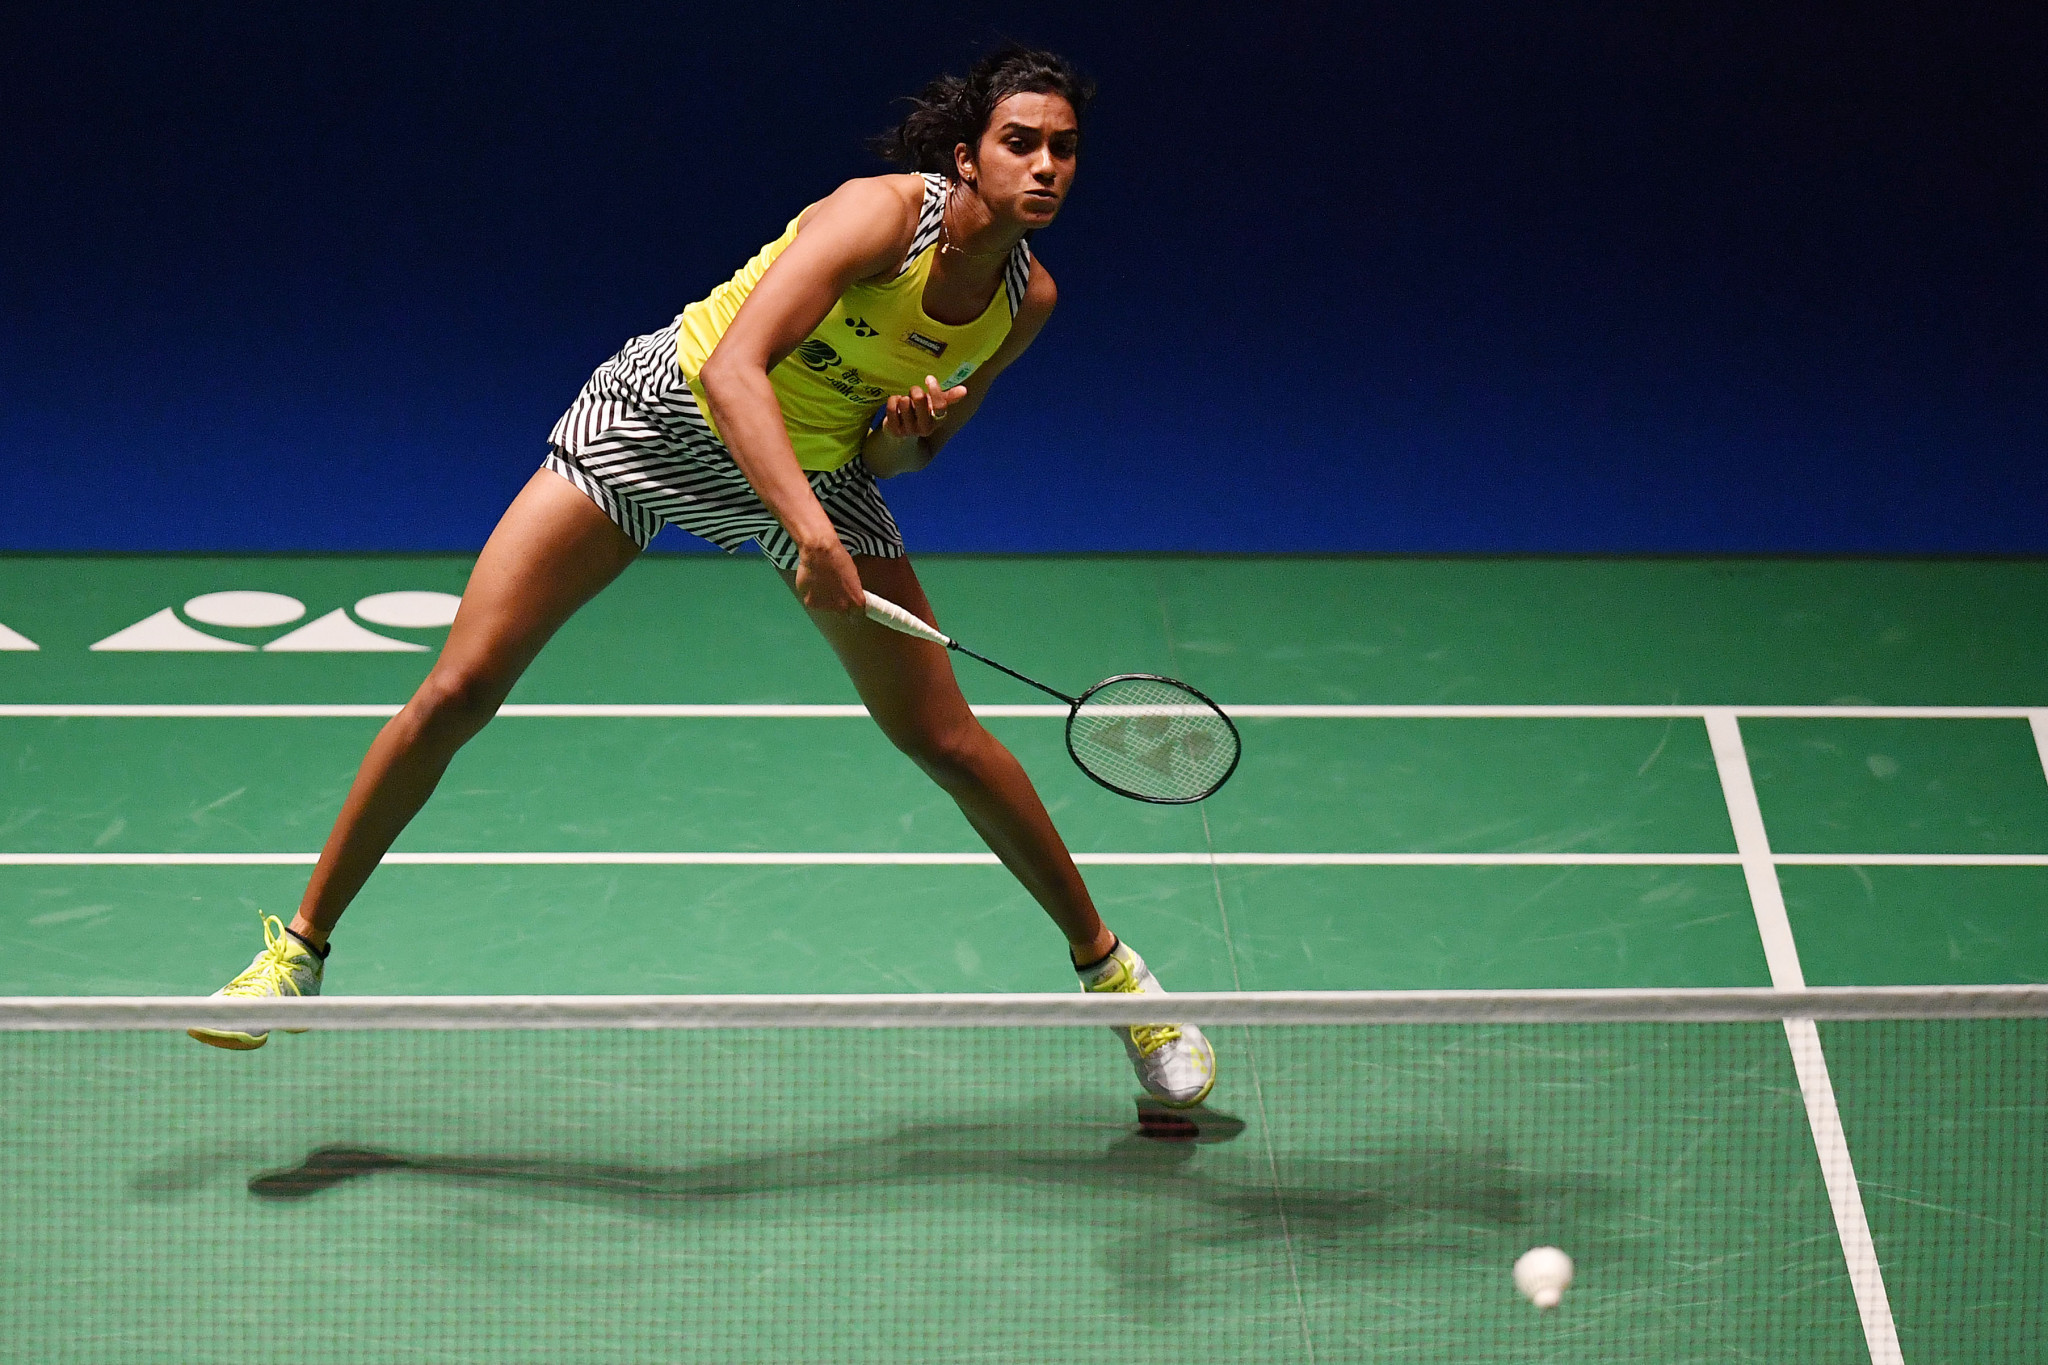 Nehwal to carry Indian banner at BWF Syed Modi International after Sindhu withdraws